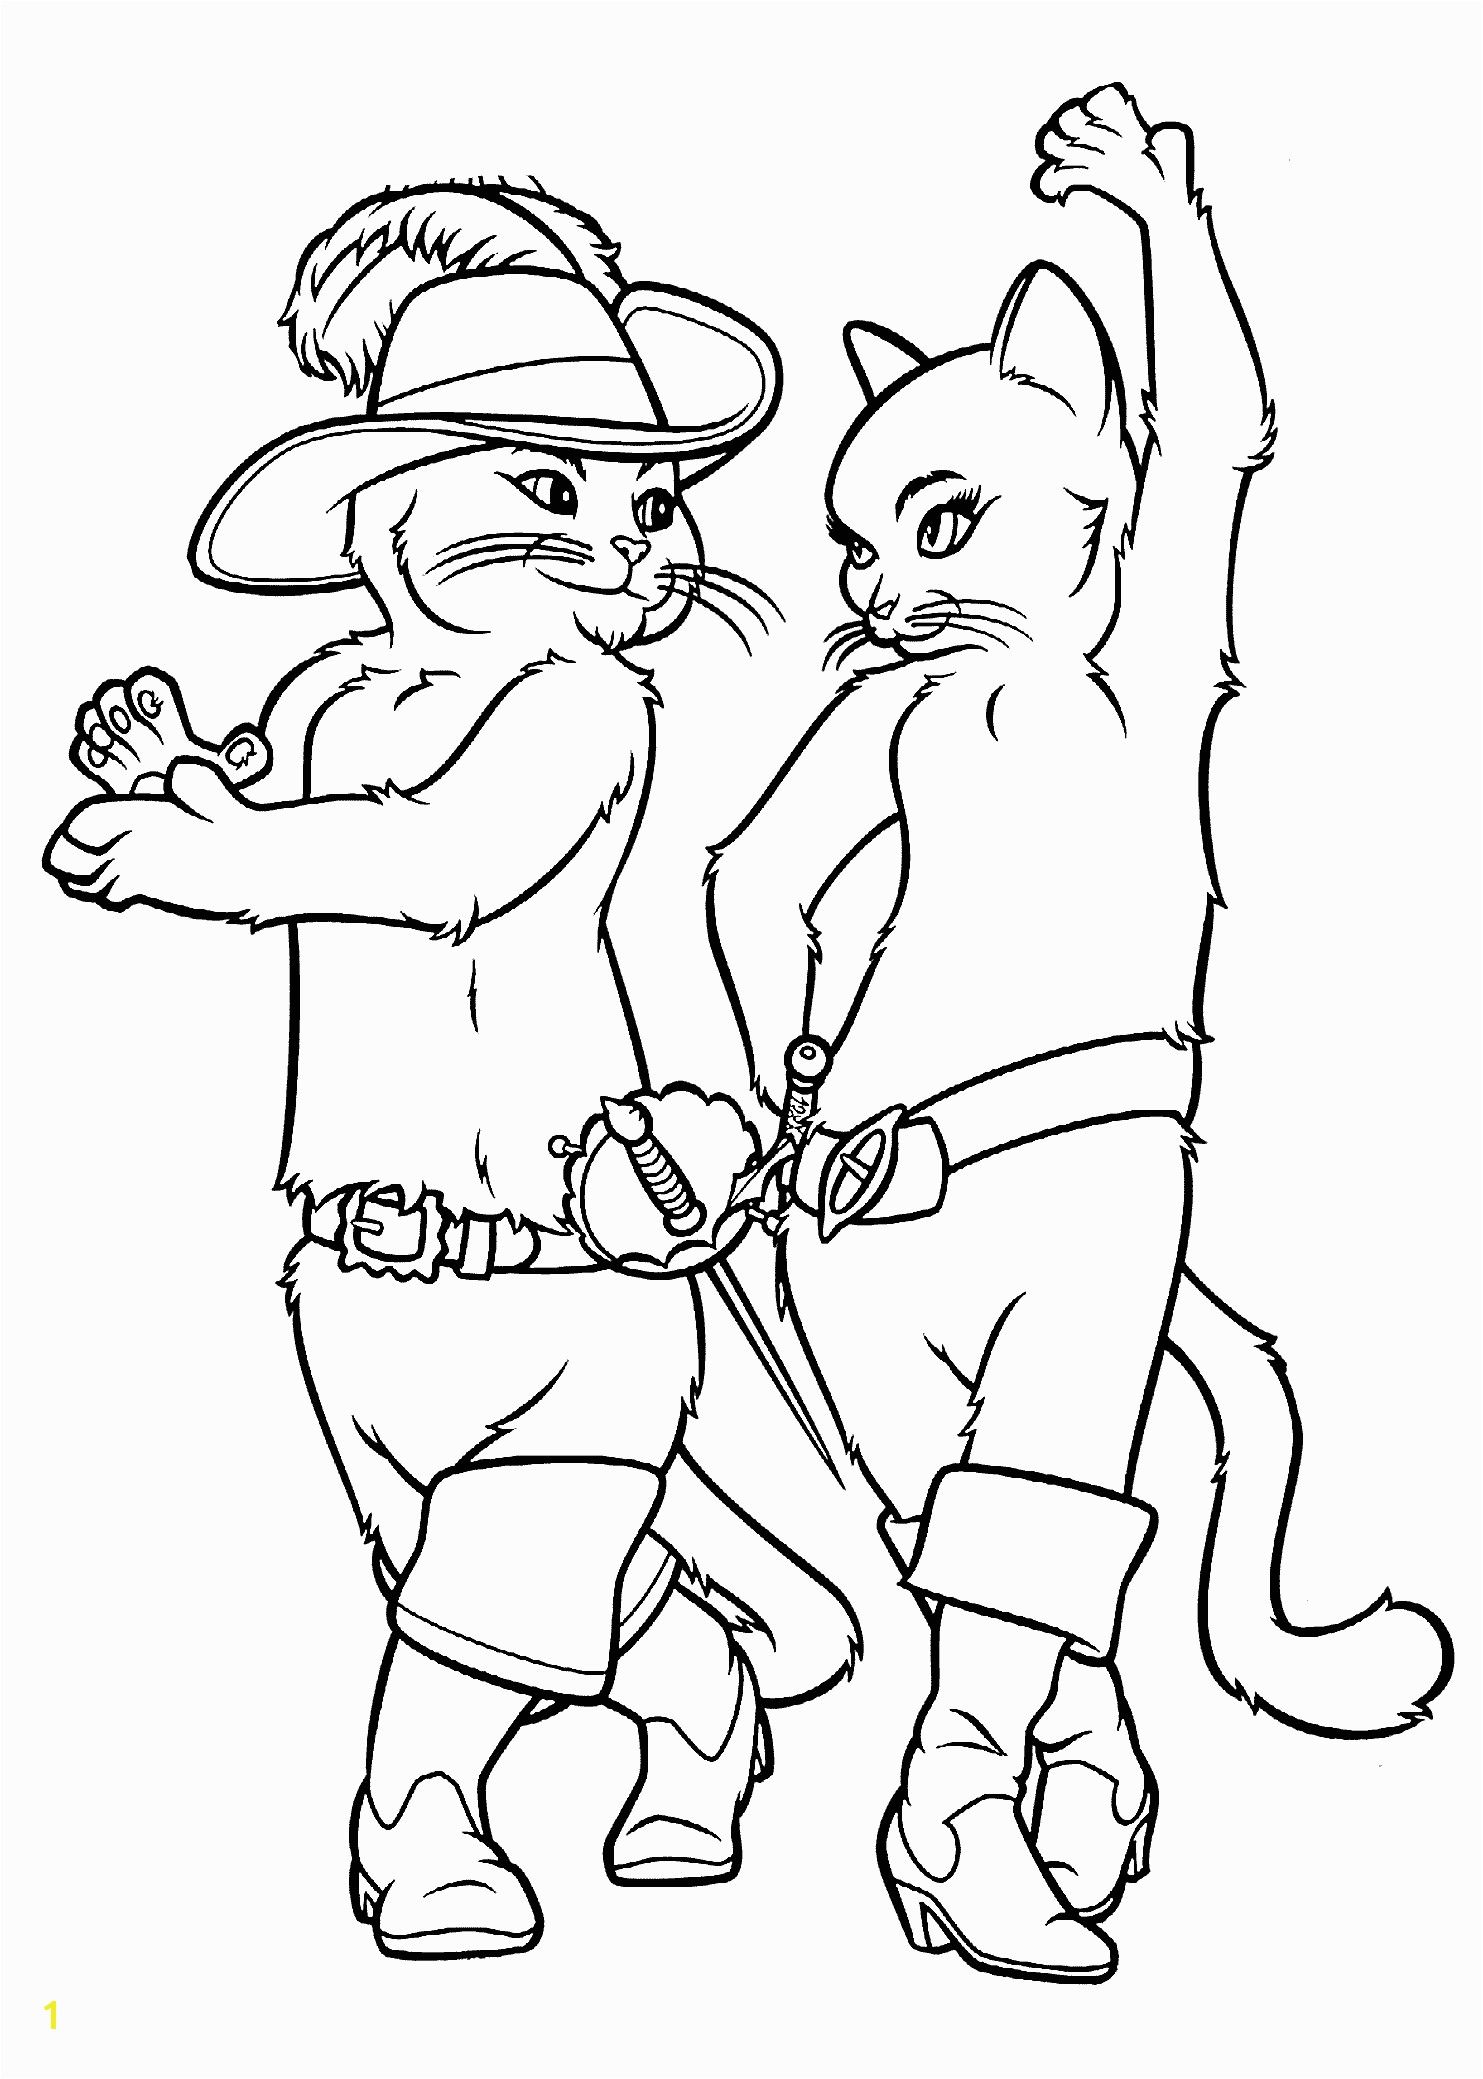 Puss in boots and Kitty coloring pages for kids printable free